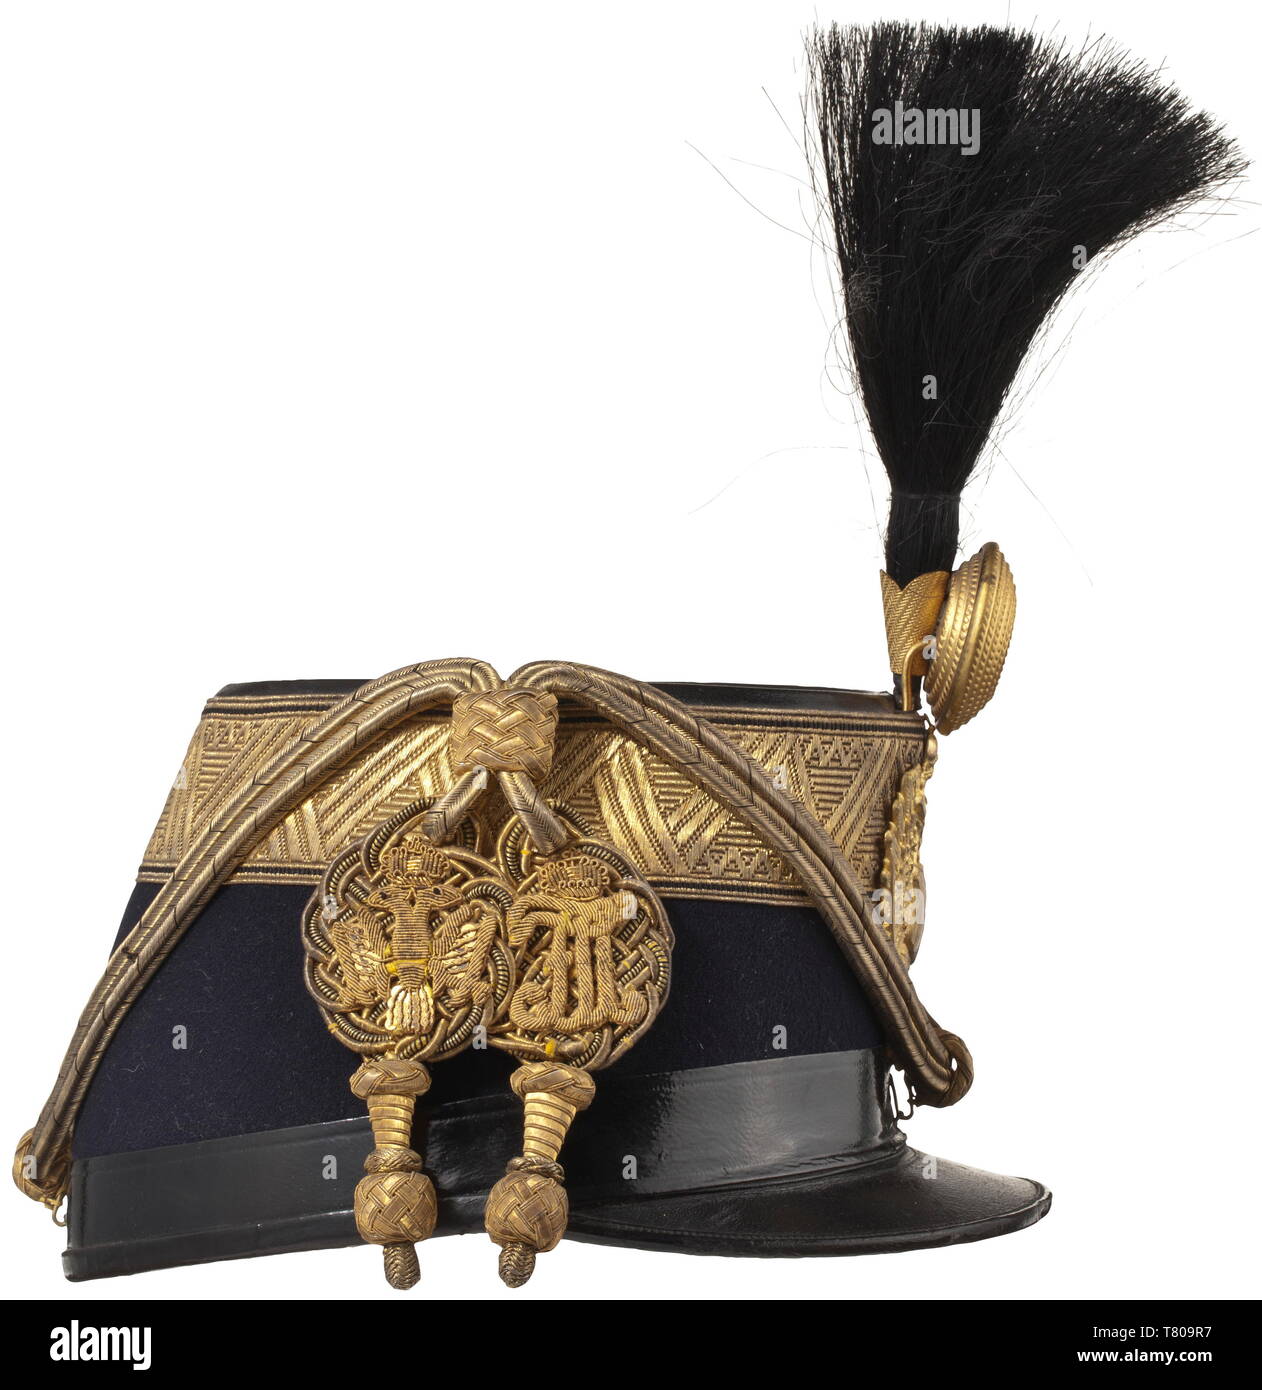 Otto von Habsburg (1912 - 2011) - a shako as Colonel of the Royal and Imperial Hussar Regiment no. 1 The body of dark blue (the regimental colour) cloth with wide gold edges, the double-headed eagle with '1' coat of arms, black horsehair bush, fire-gilt metal rose with initials 'FJ I', the 'Vitéz-Kötés' in finest issue with massively embroidered initials and double-headed eagle. The interior with a fine white silk liner and a crowned 'O' stamped in gold, black patent leather chin strap. The shako was a gift from Hussar Regiment no. 1, of the high, Additional-Rights-Clearance-Info-Not-Available Stock Photo